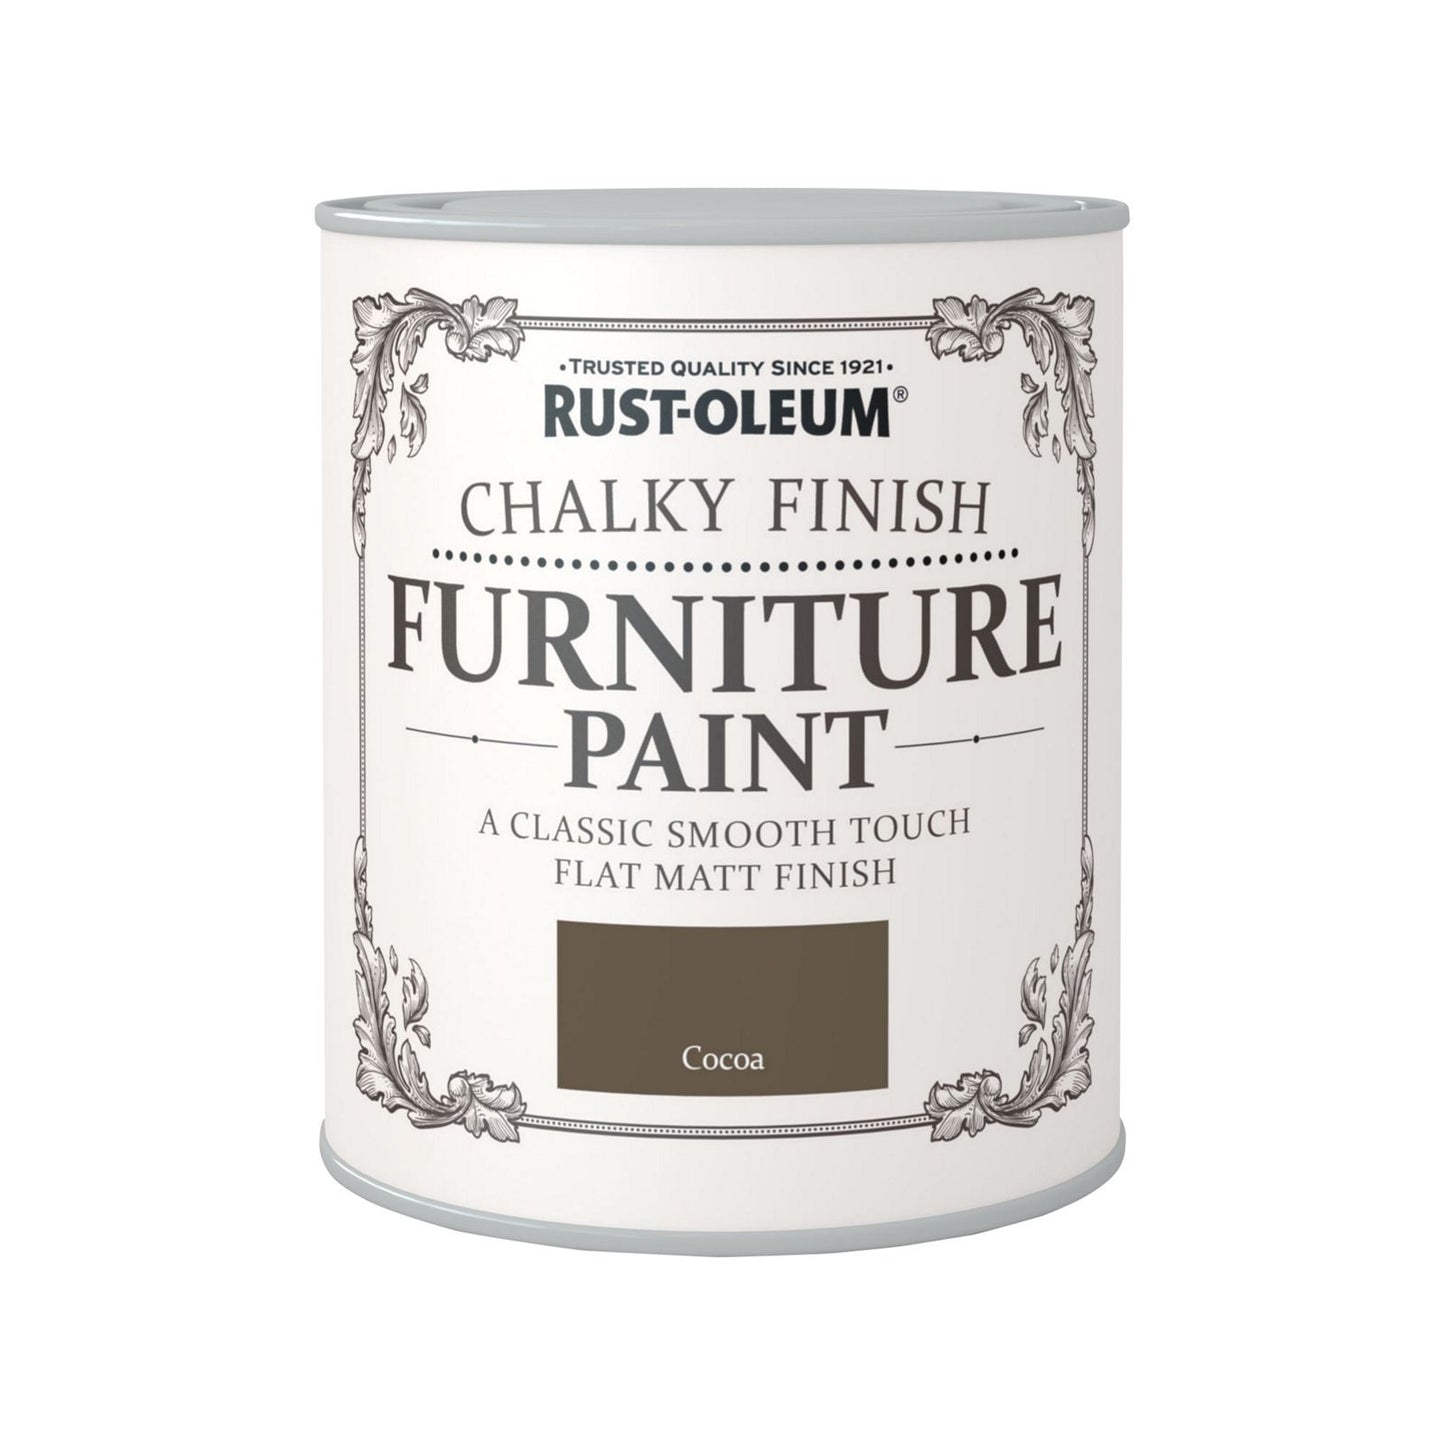 Rust-Oleum Chalky Finish Furniture Paint Cocoa